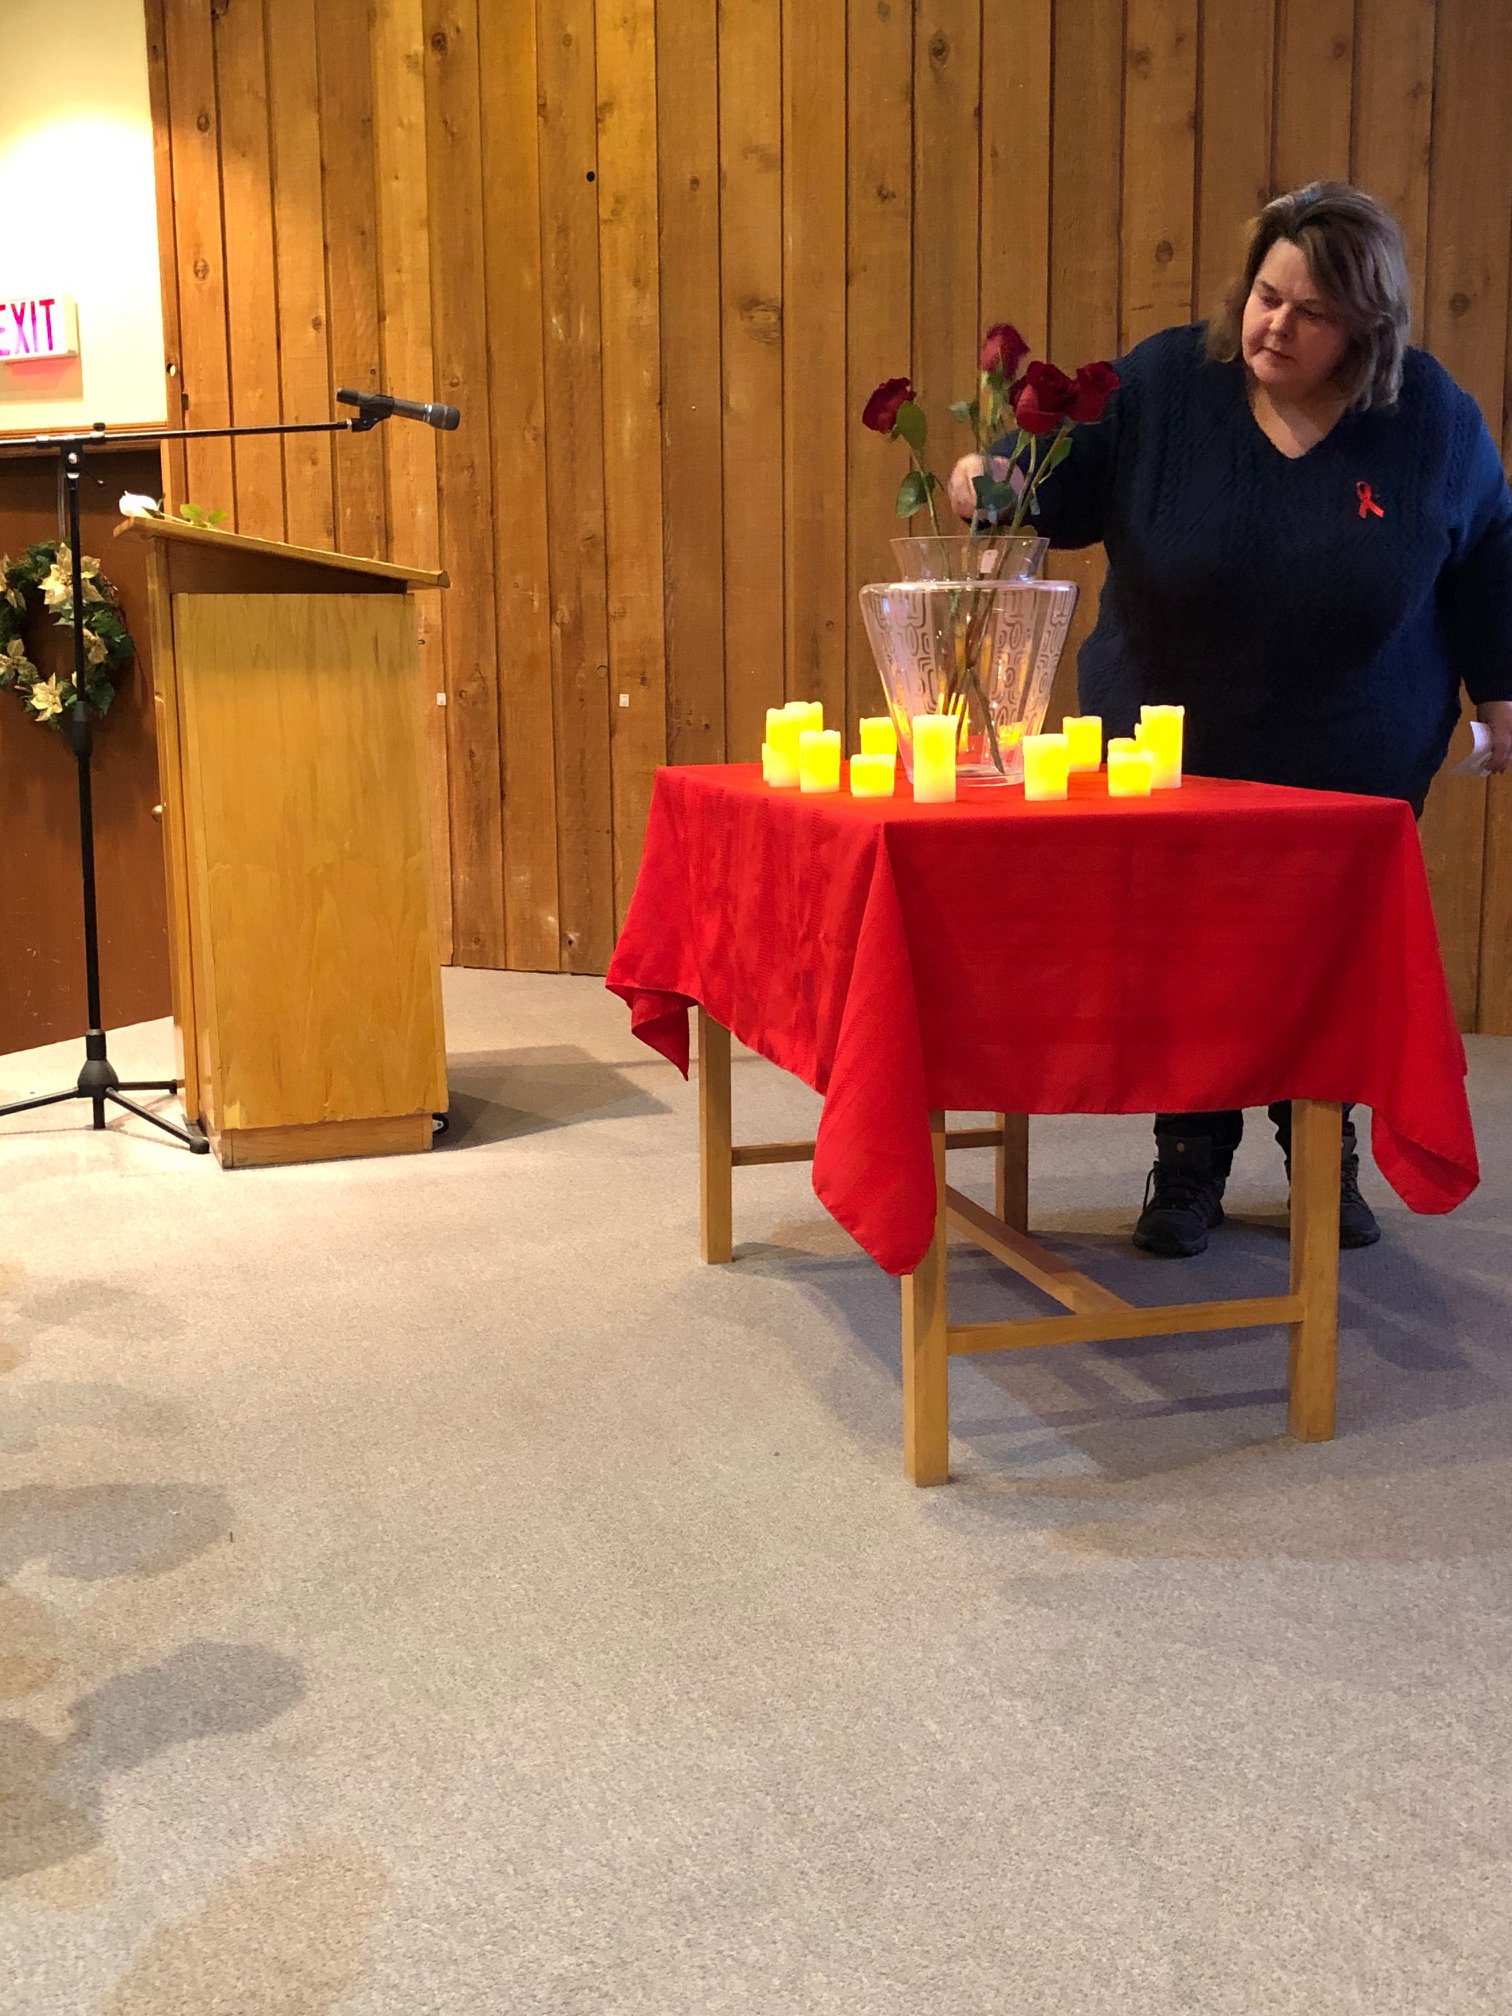 Dawn Skinner, PSAC North Women's Committee, placed a rose in the vase in memory of Anne-Marie Edward 